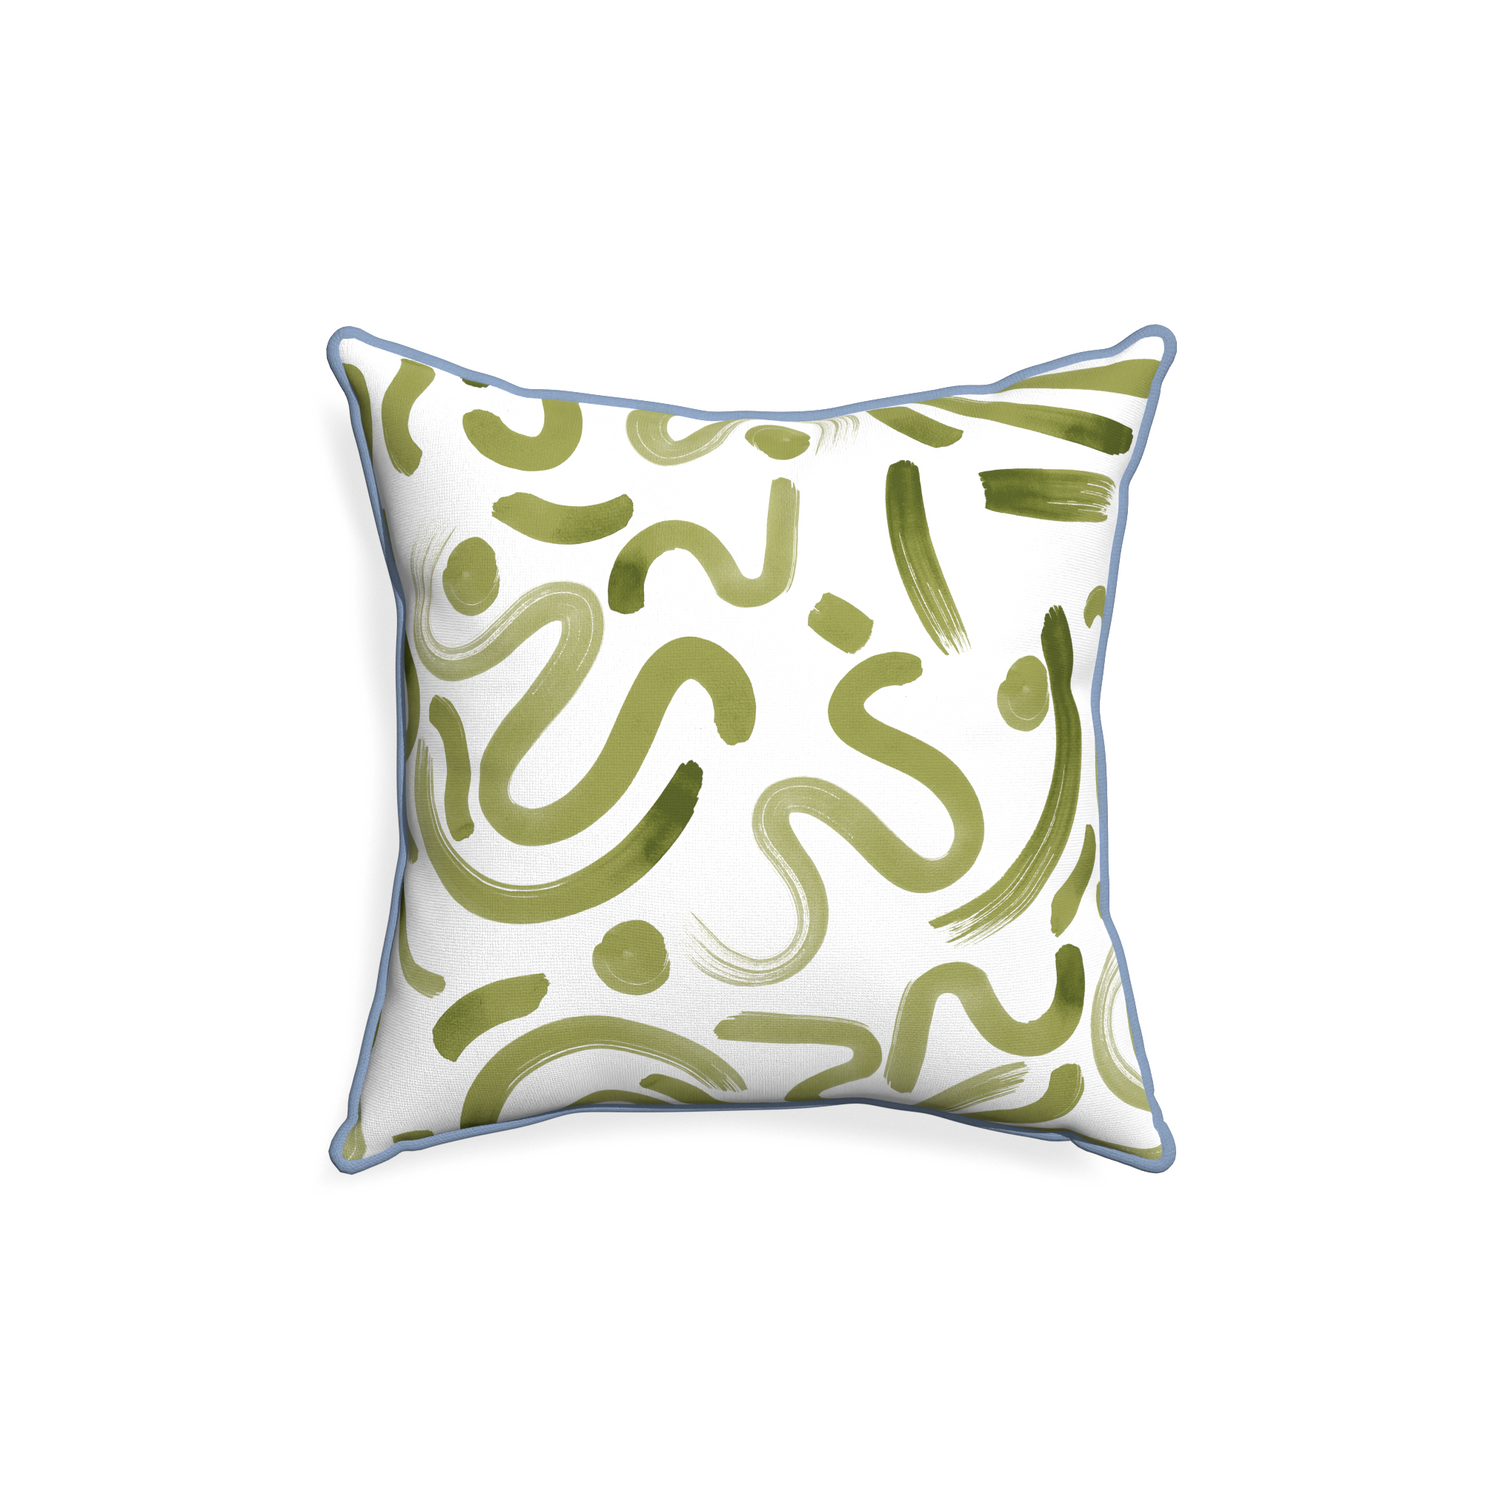 18-square hockney moss custom pillow with sky piping on white background